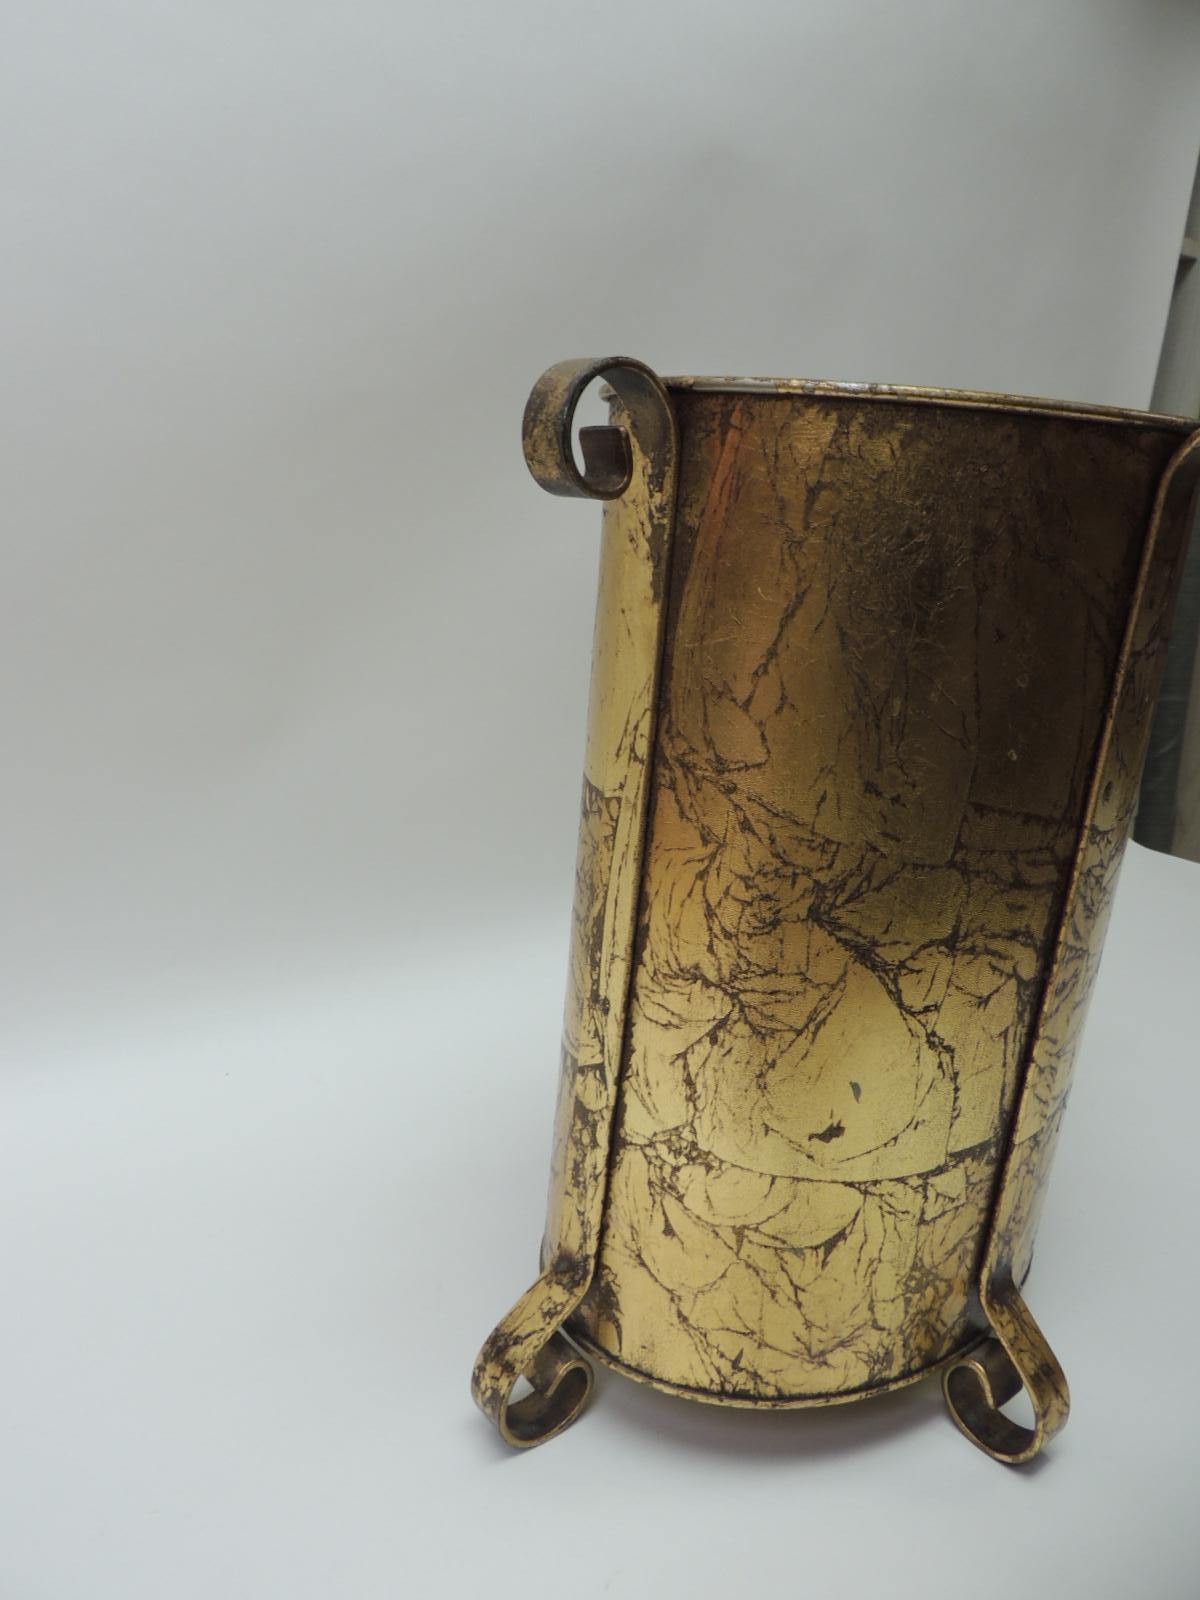 Metal gold leaf vintage waste basket/garbage can with turned iron details.
Size: 10 x 12 x 14H